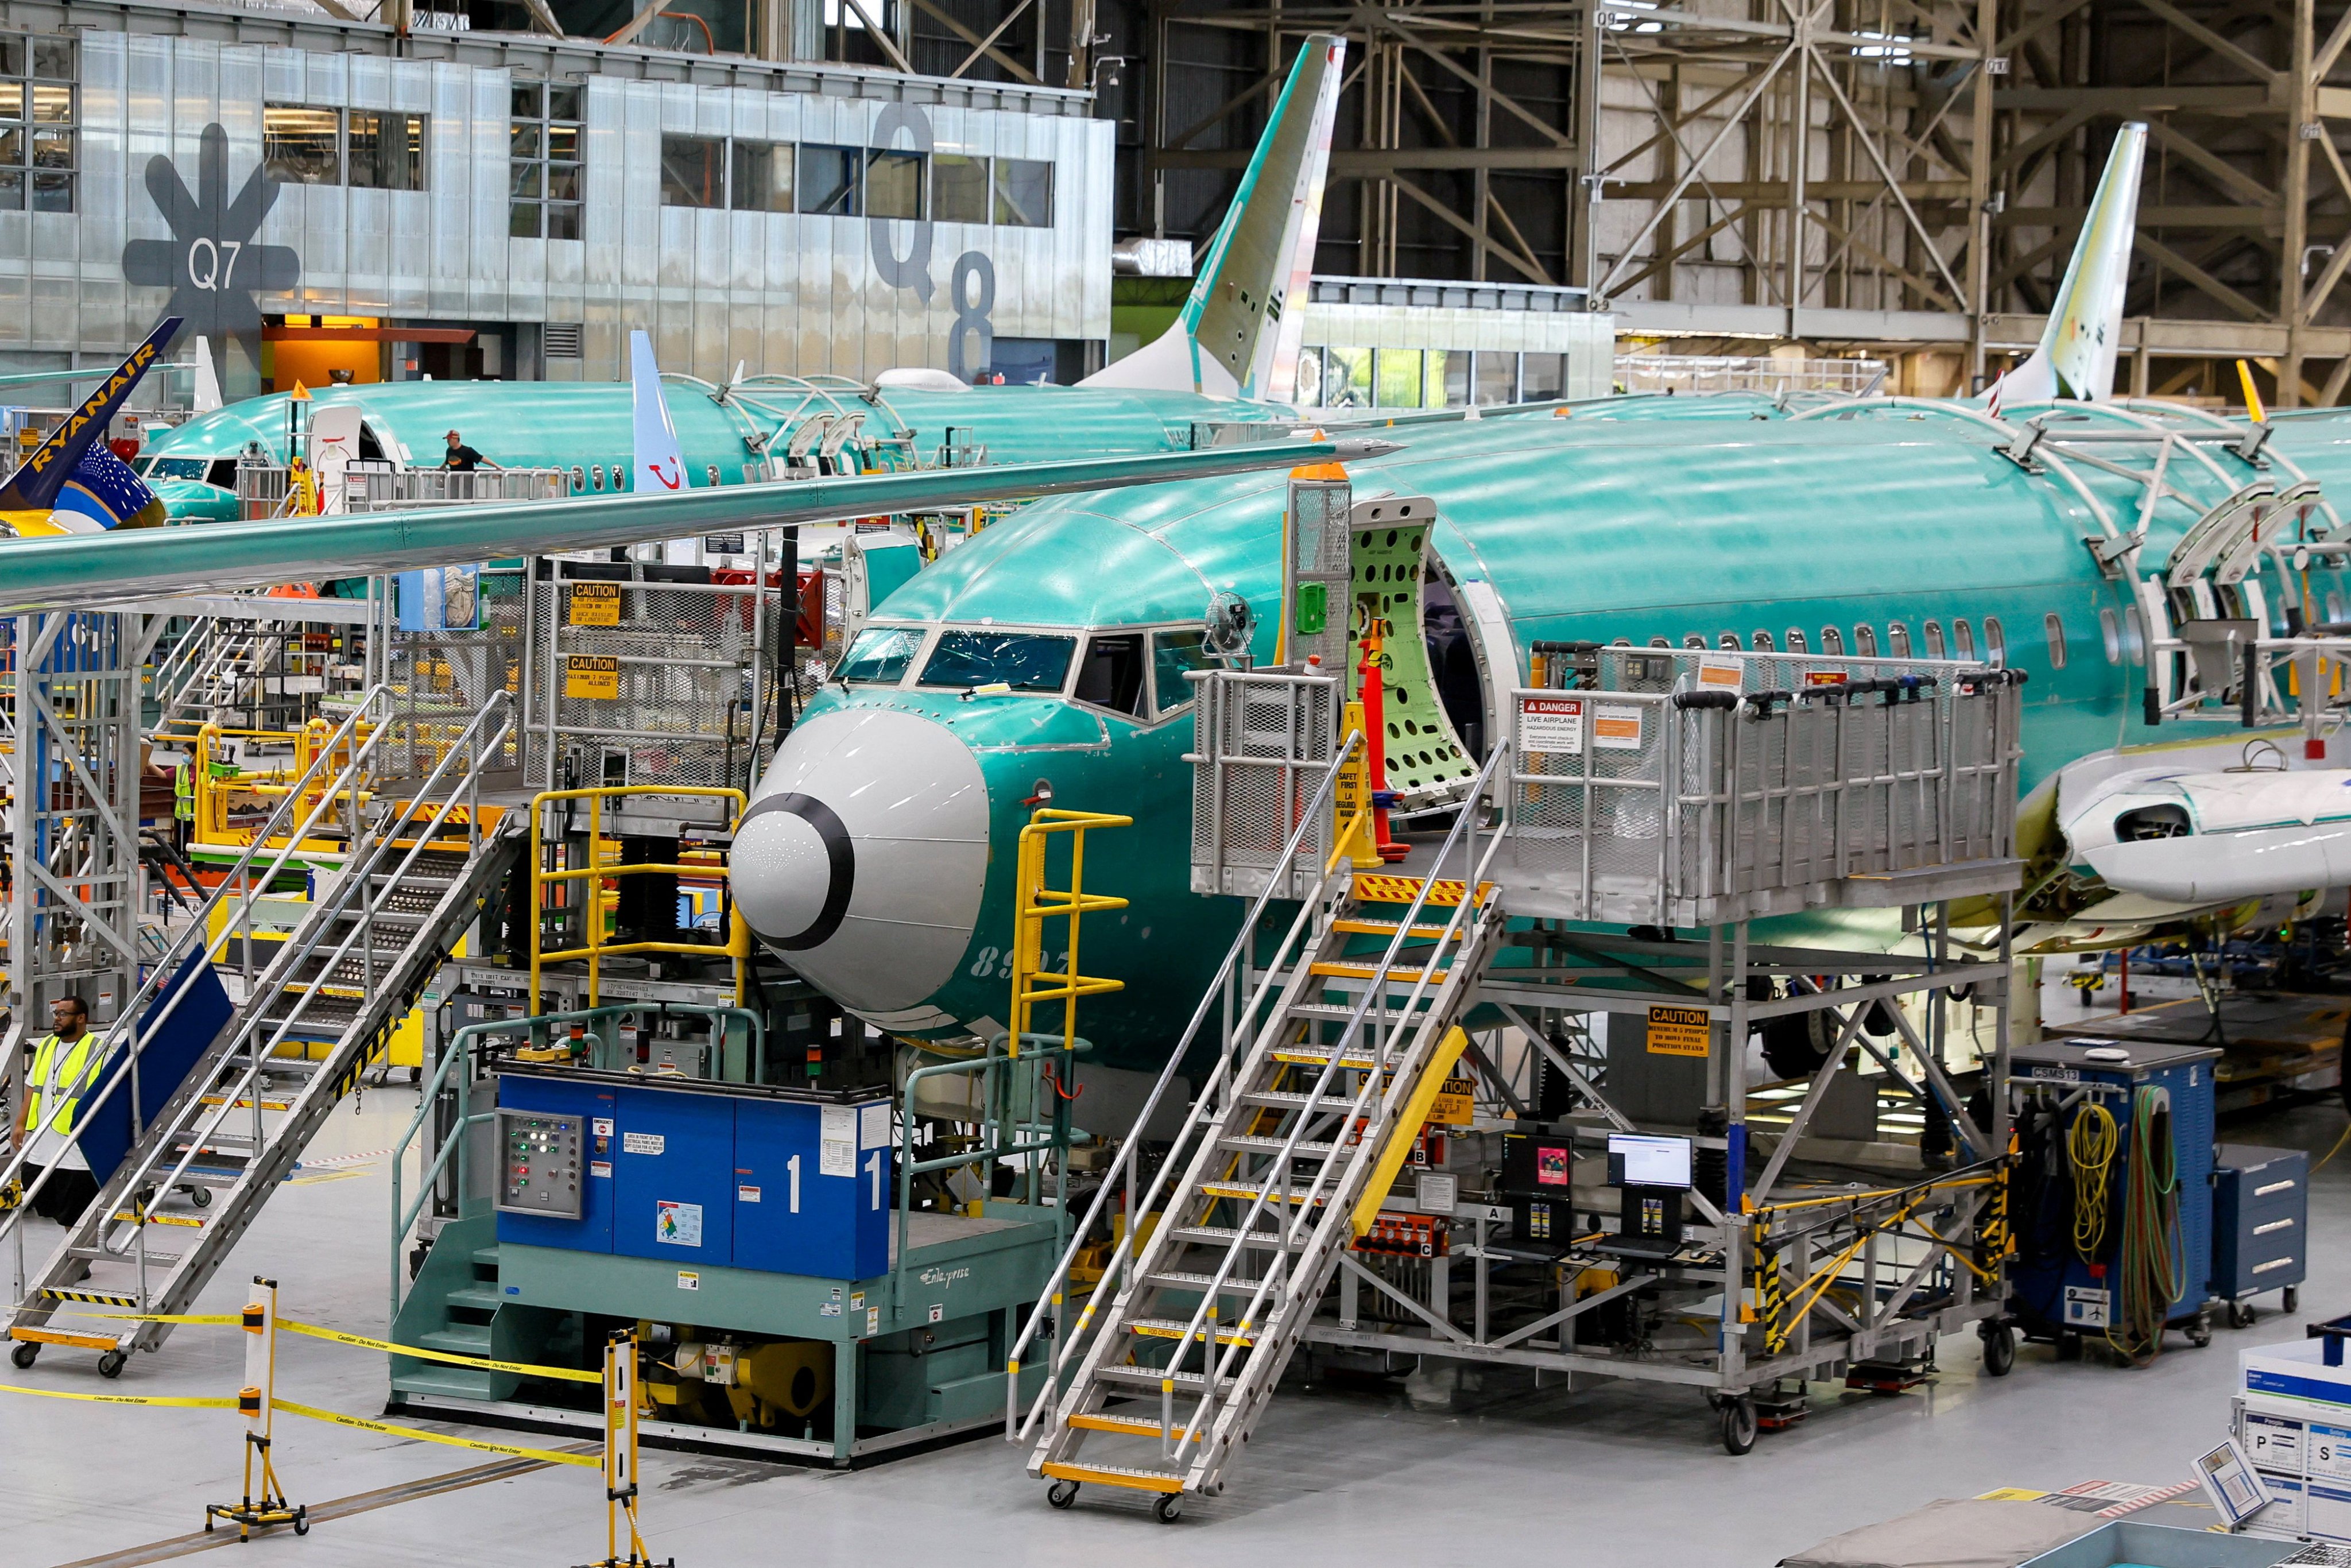 Boeing 737 MaX aircraft are assembled at the company’s plant in Renton, Washington, on Thursday. Photo: Reuters